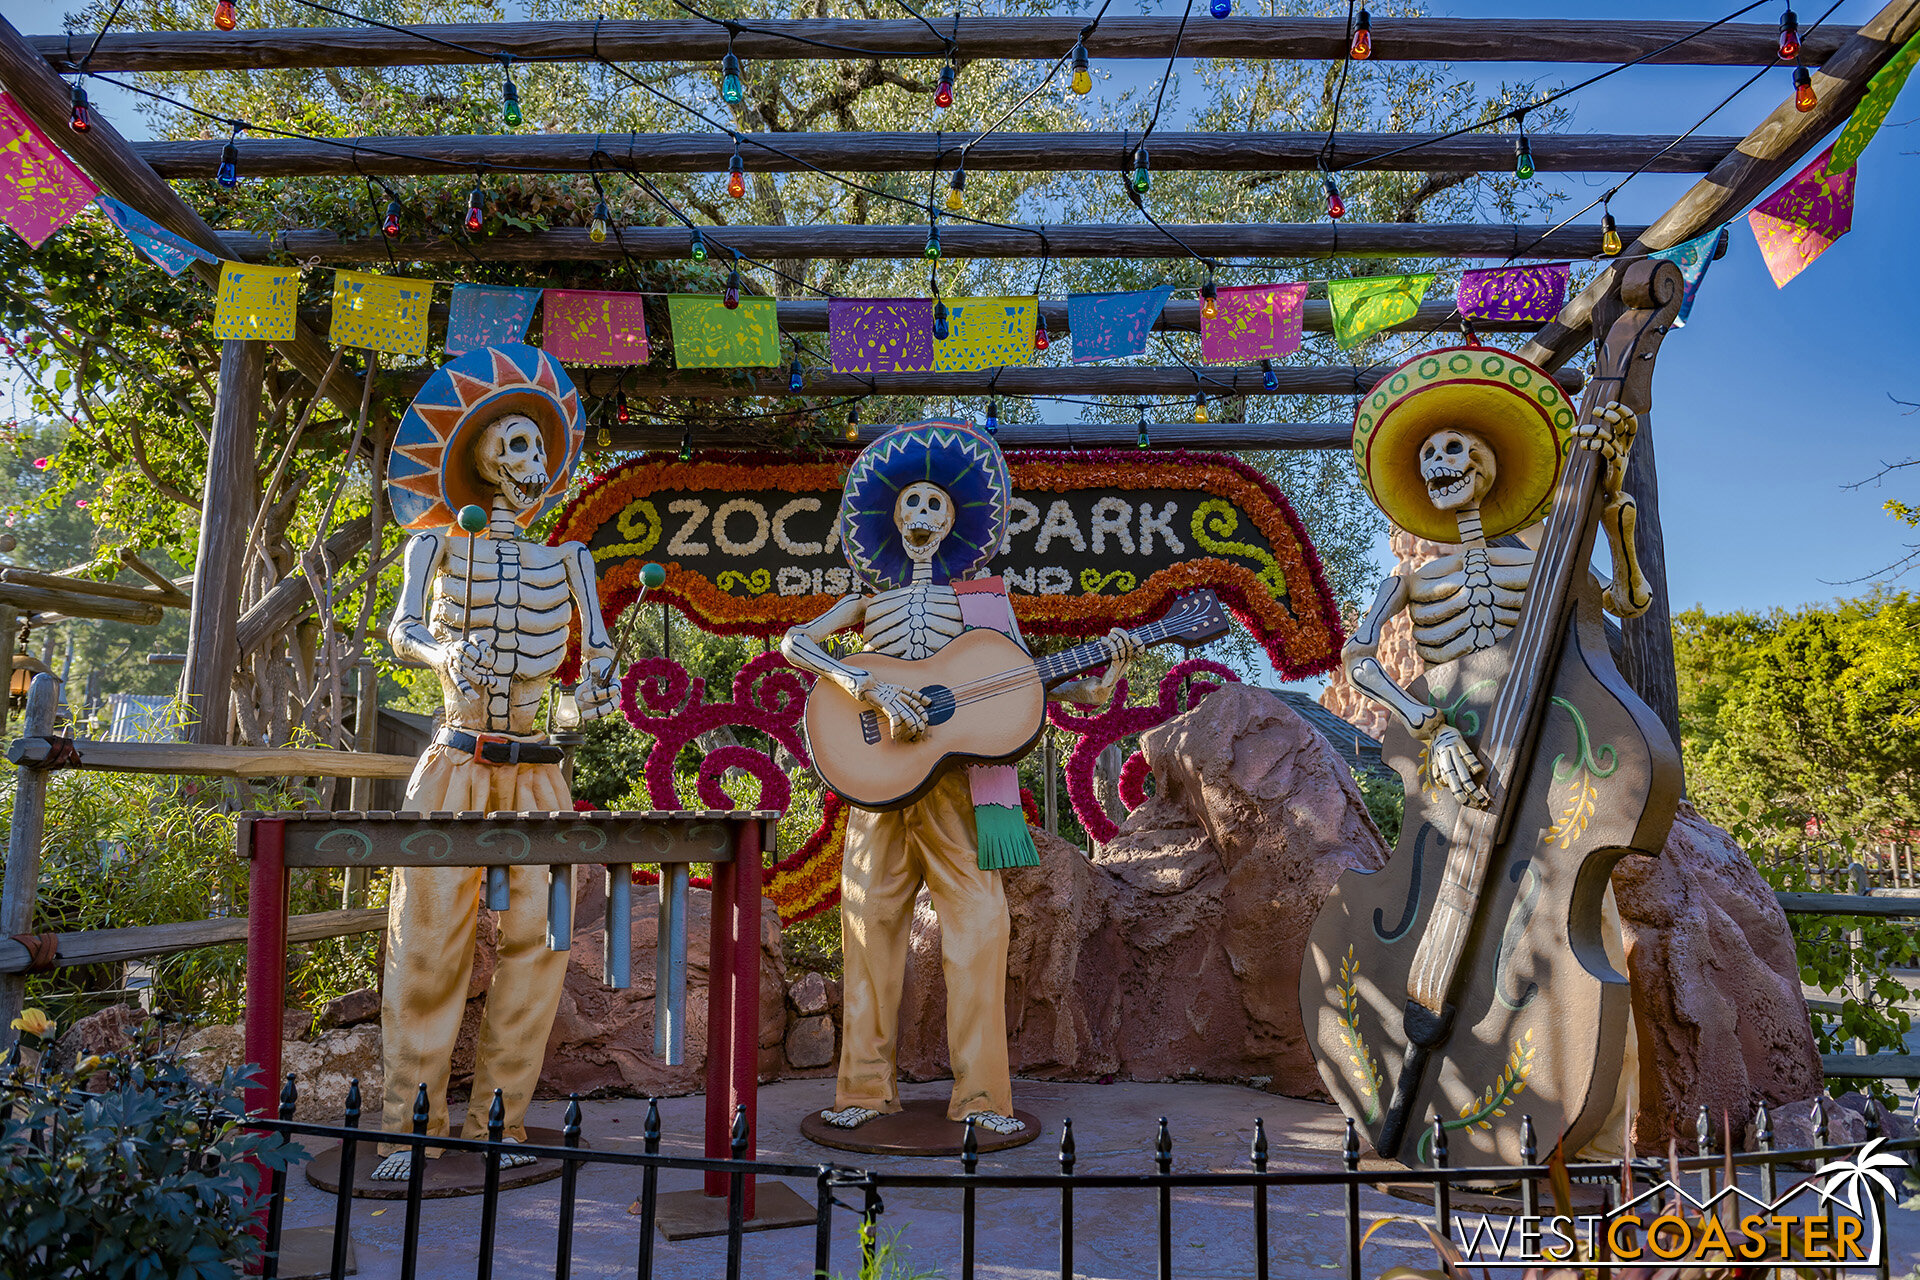  Every year, Frontierland features a display celebrating Día de los Muertos, or the Mexican Day of the Dead Holiday that bridges October and November. 